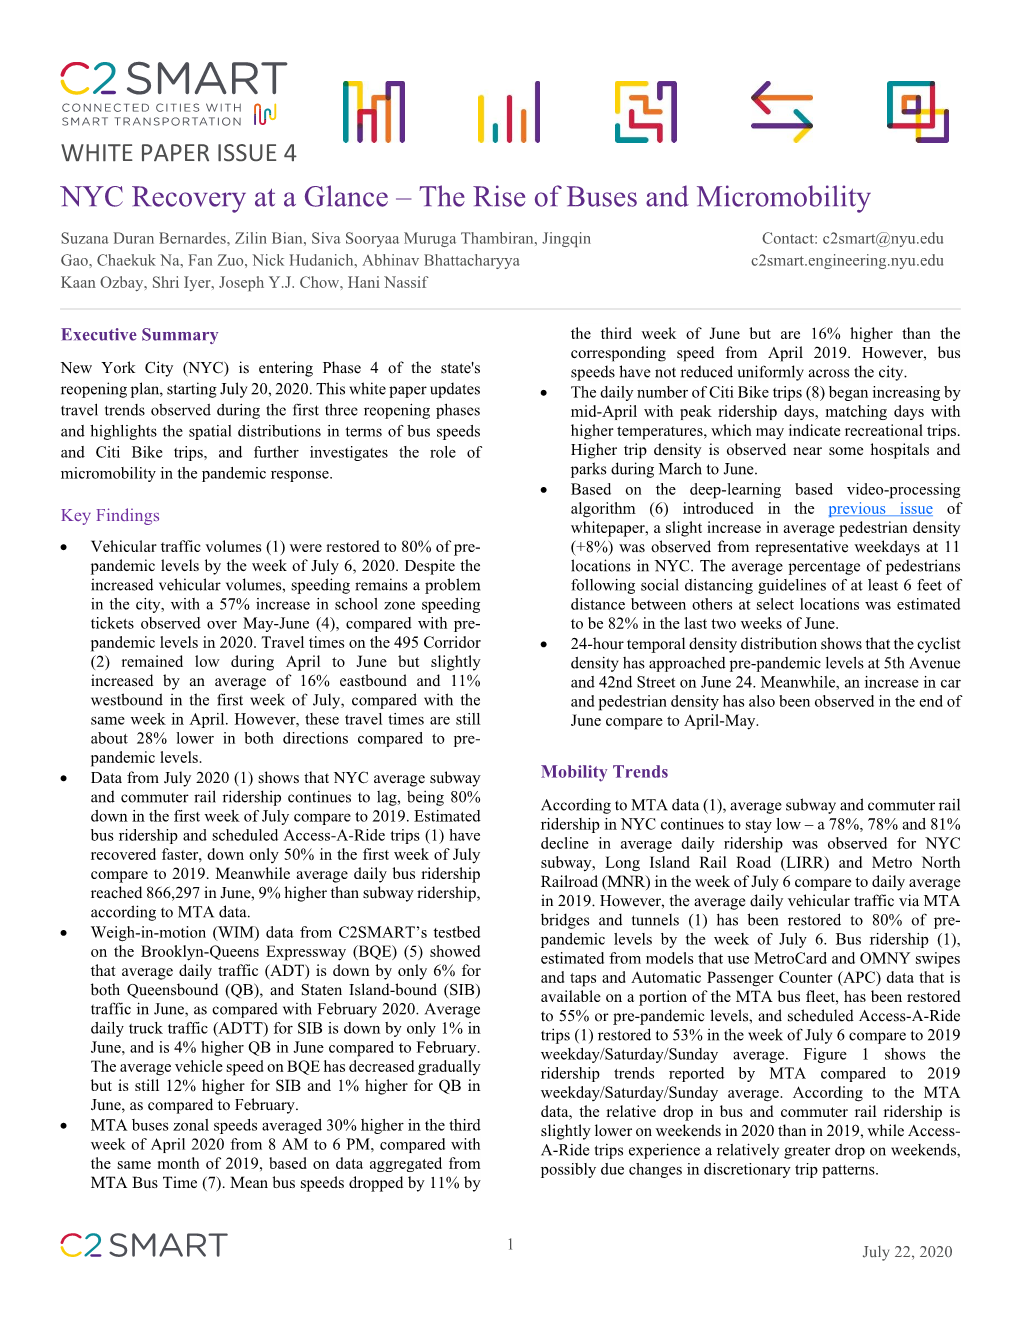 NYC Recovery at a Glance – the Rise of Buses and Micromobility